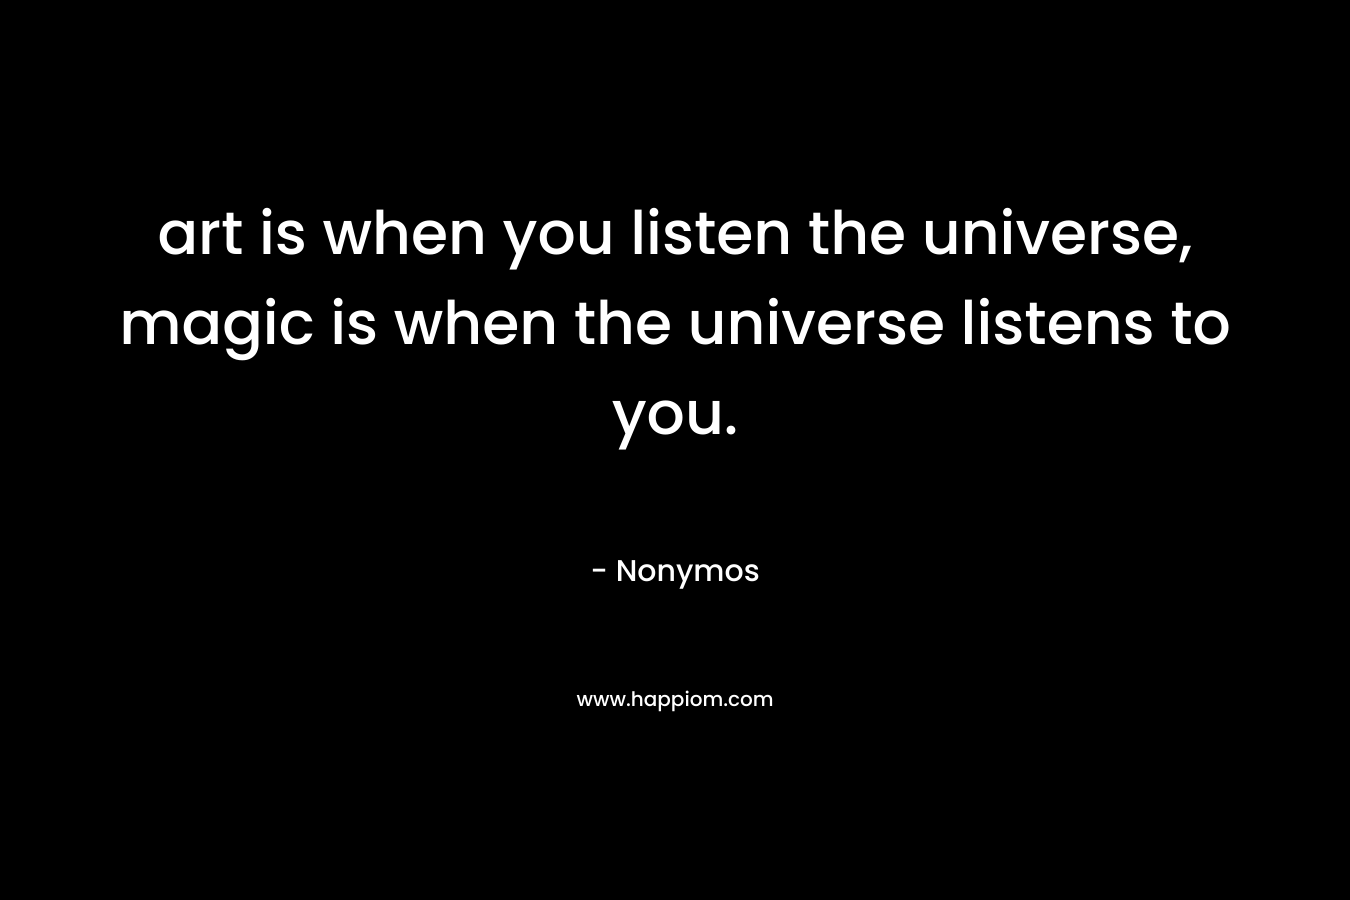 art is when you listen the universe, magic is when the universe listens to you.